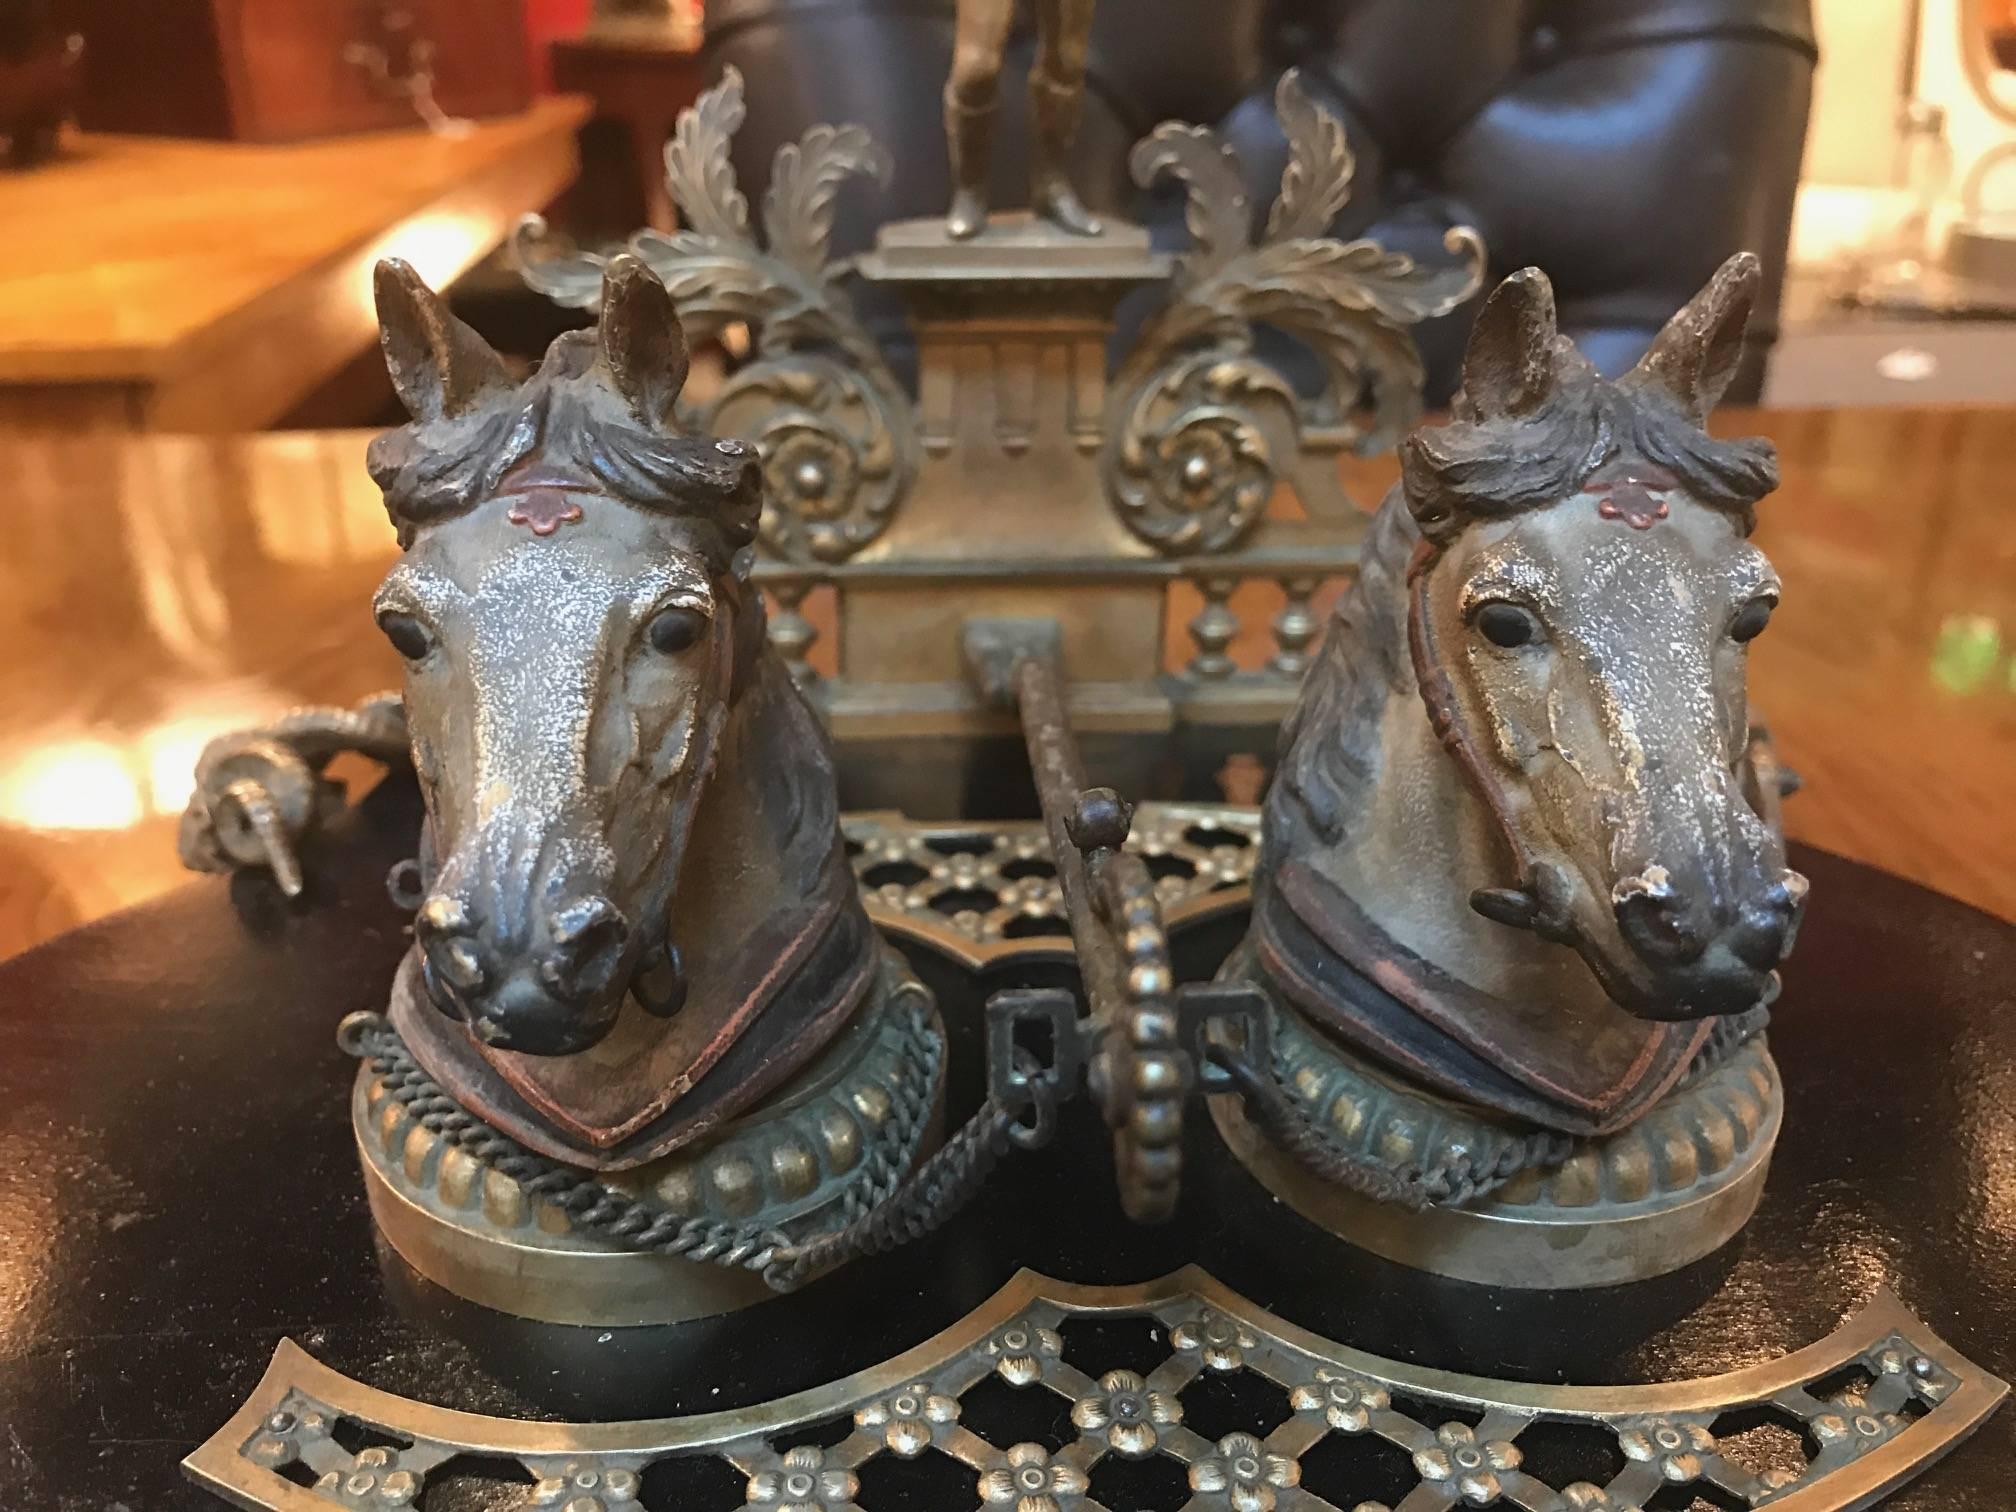 An equestrian themed bronze and wood double inkstand. The footed base supporting the oval black base fitted with two horse head Vienna bronze style inkwells. The back has a figure of a jockey that has a slight lean inward. The back has a place to